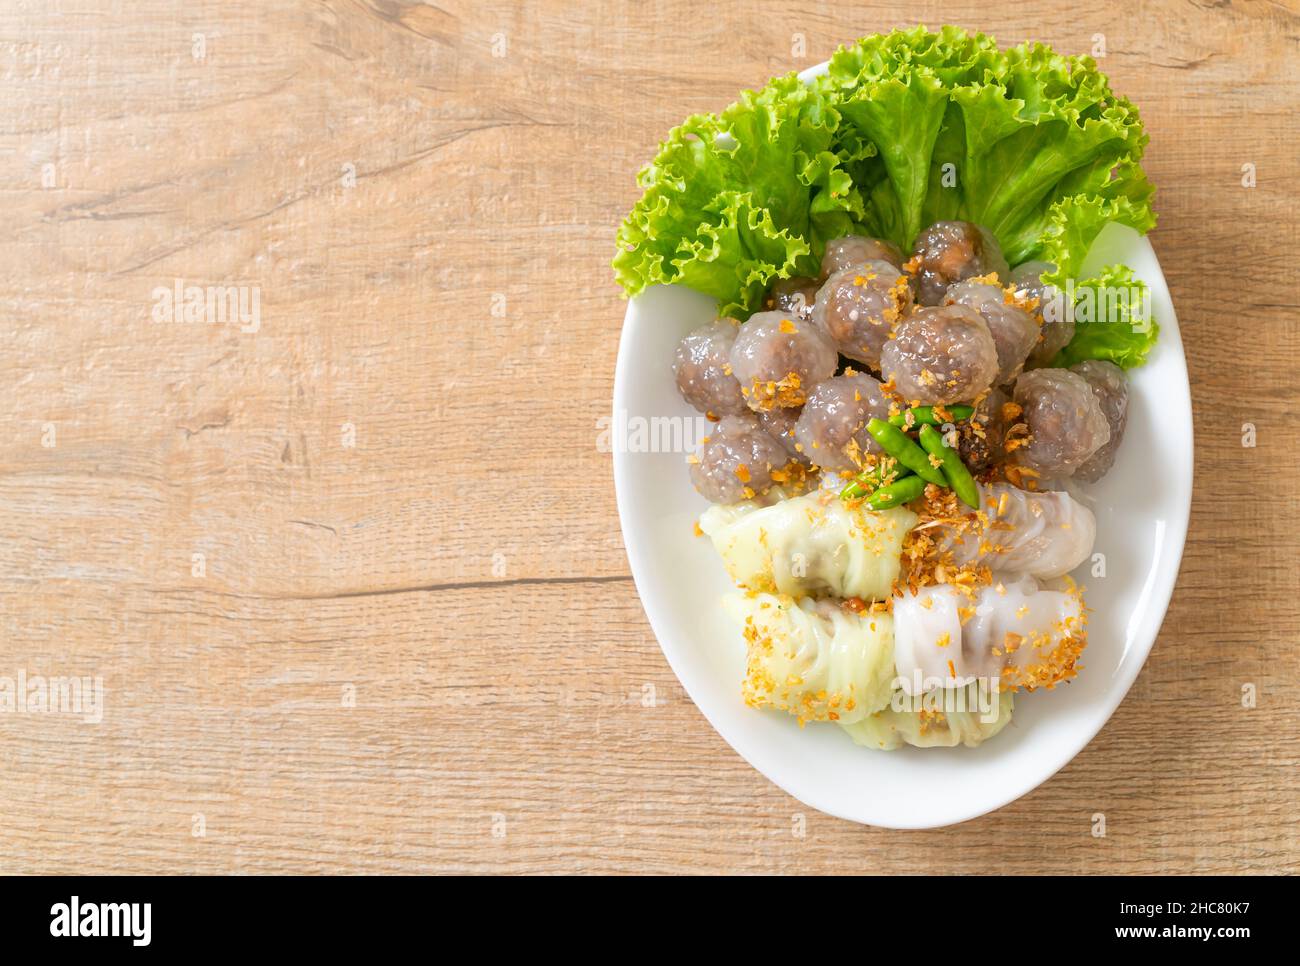 The transparent balls are called Saku Sai Moo or Steamed Tapioca Dumplings Ball with Pork Filling and ( Kow Griep Pag Mor)Pork Steamed Rice Parcels or Stock Photo